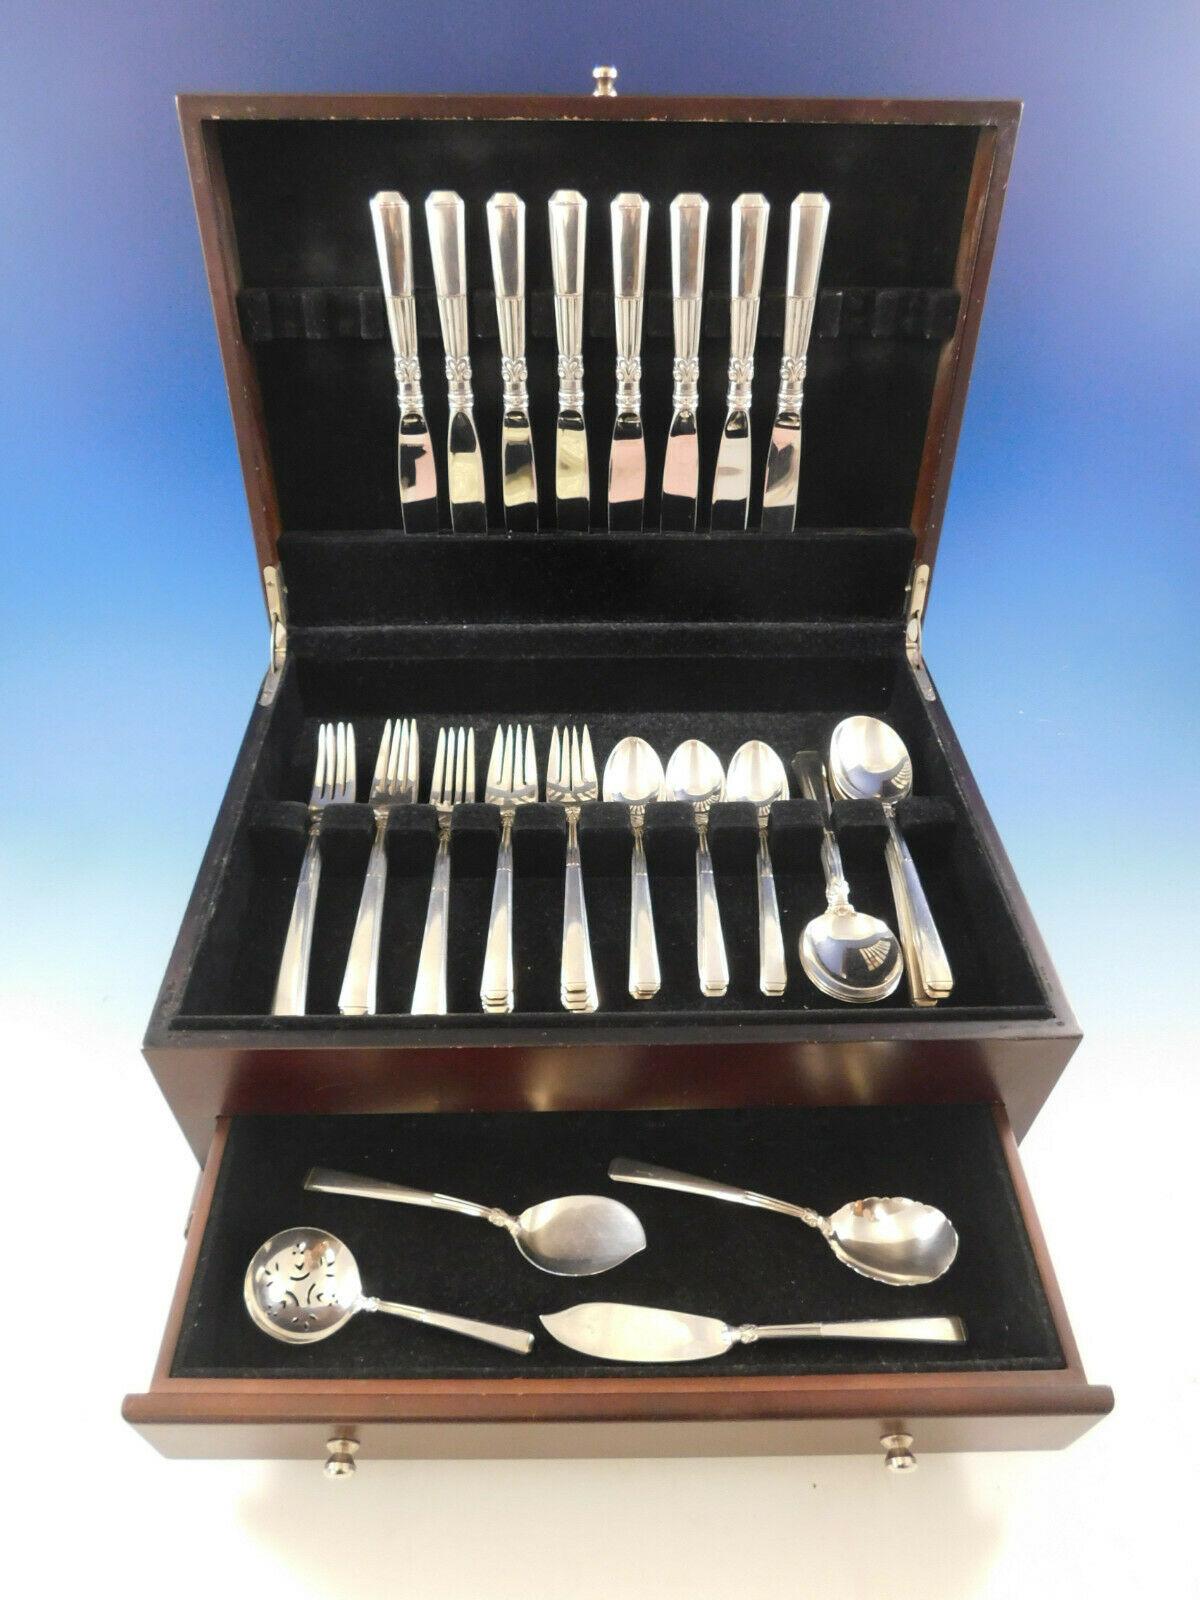 Epic by Gorham, circa 1941, sterling silver flatware set, 44 pieces. This set includes:

8 knives, 8 3/4